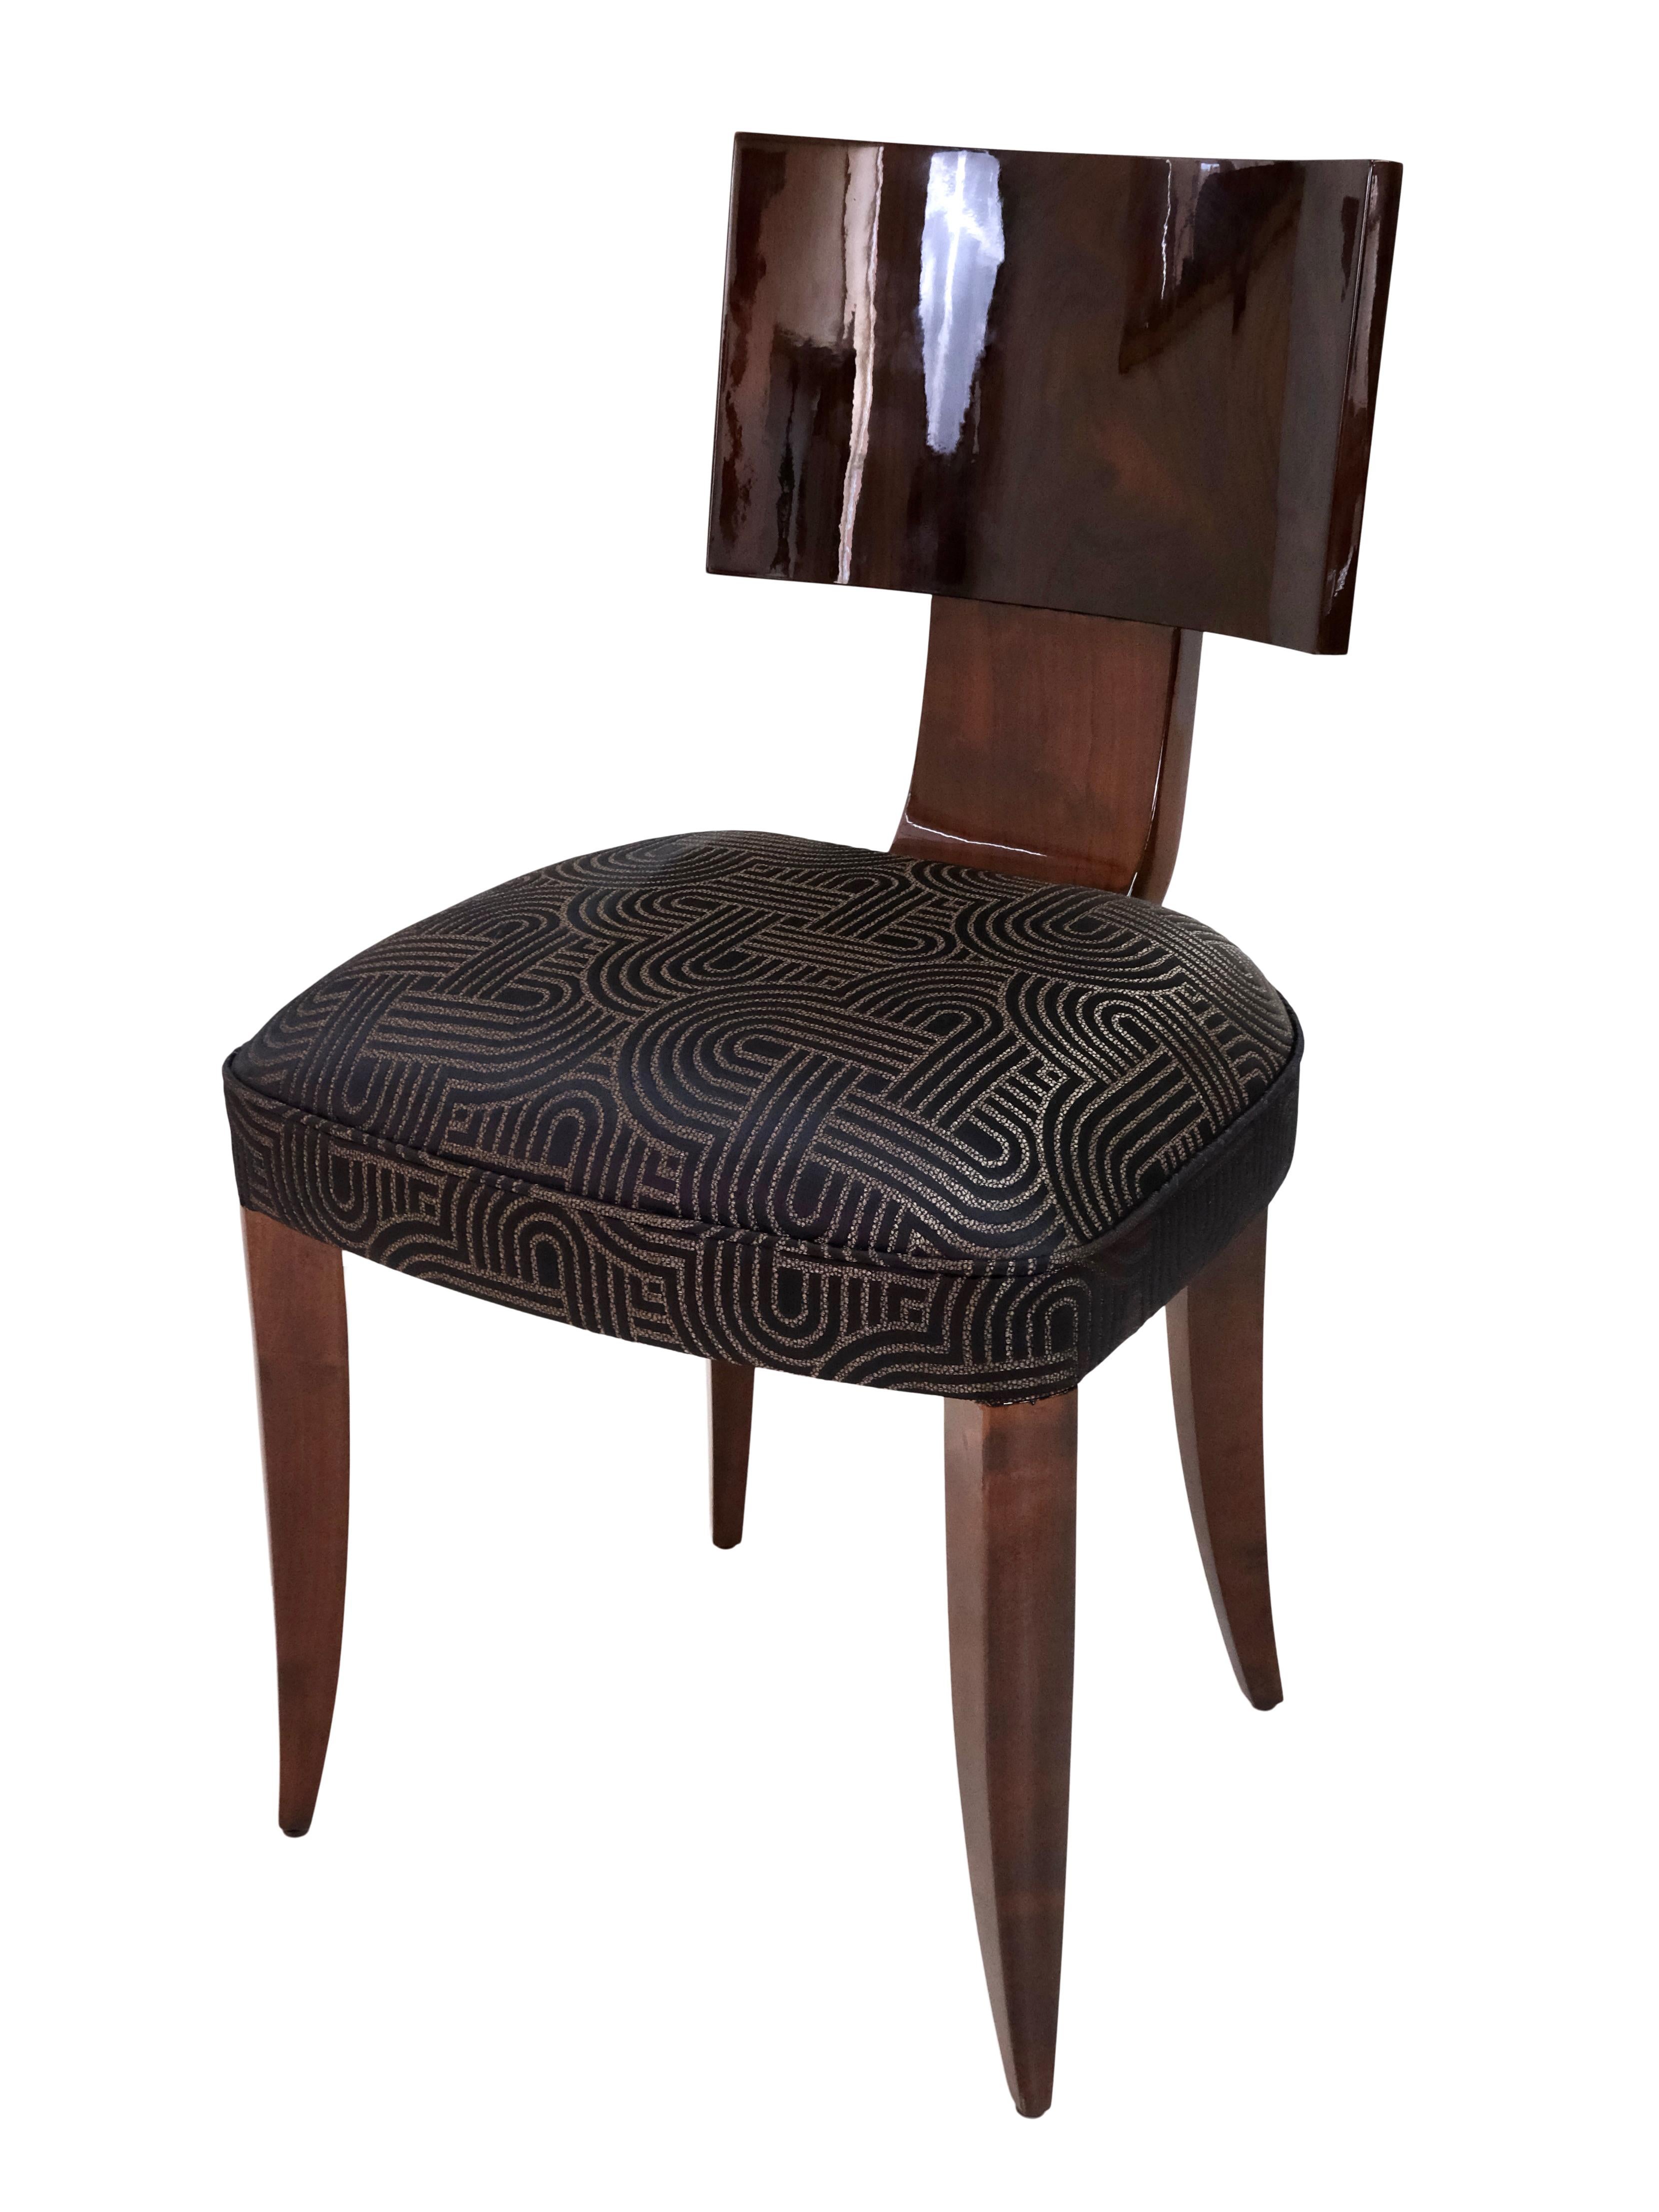 Dining room chairs without armrests
High quality restored 
Probably ash stained, high gloss lacquered 
Black and gold upholstery with Art Deco typical ornaments

Set consisting of 6 items

Original Art Deco, France